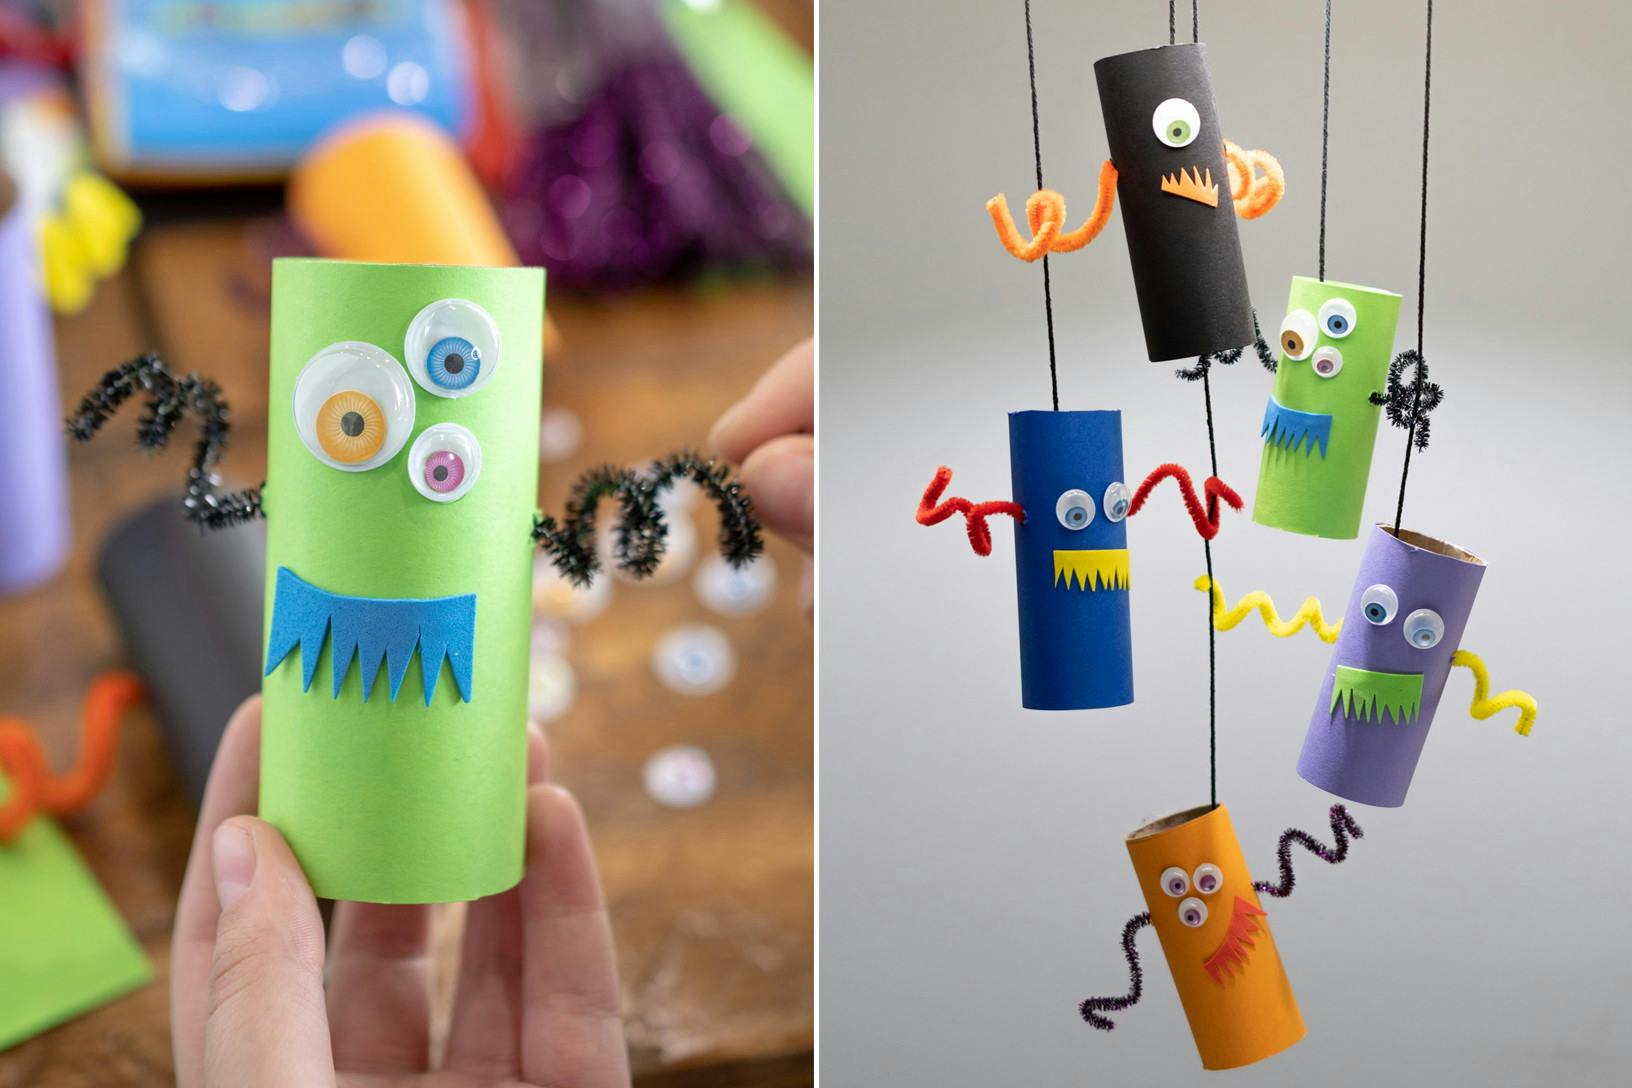 Toilet paper roll made into monsters to create a paper monster mobile.